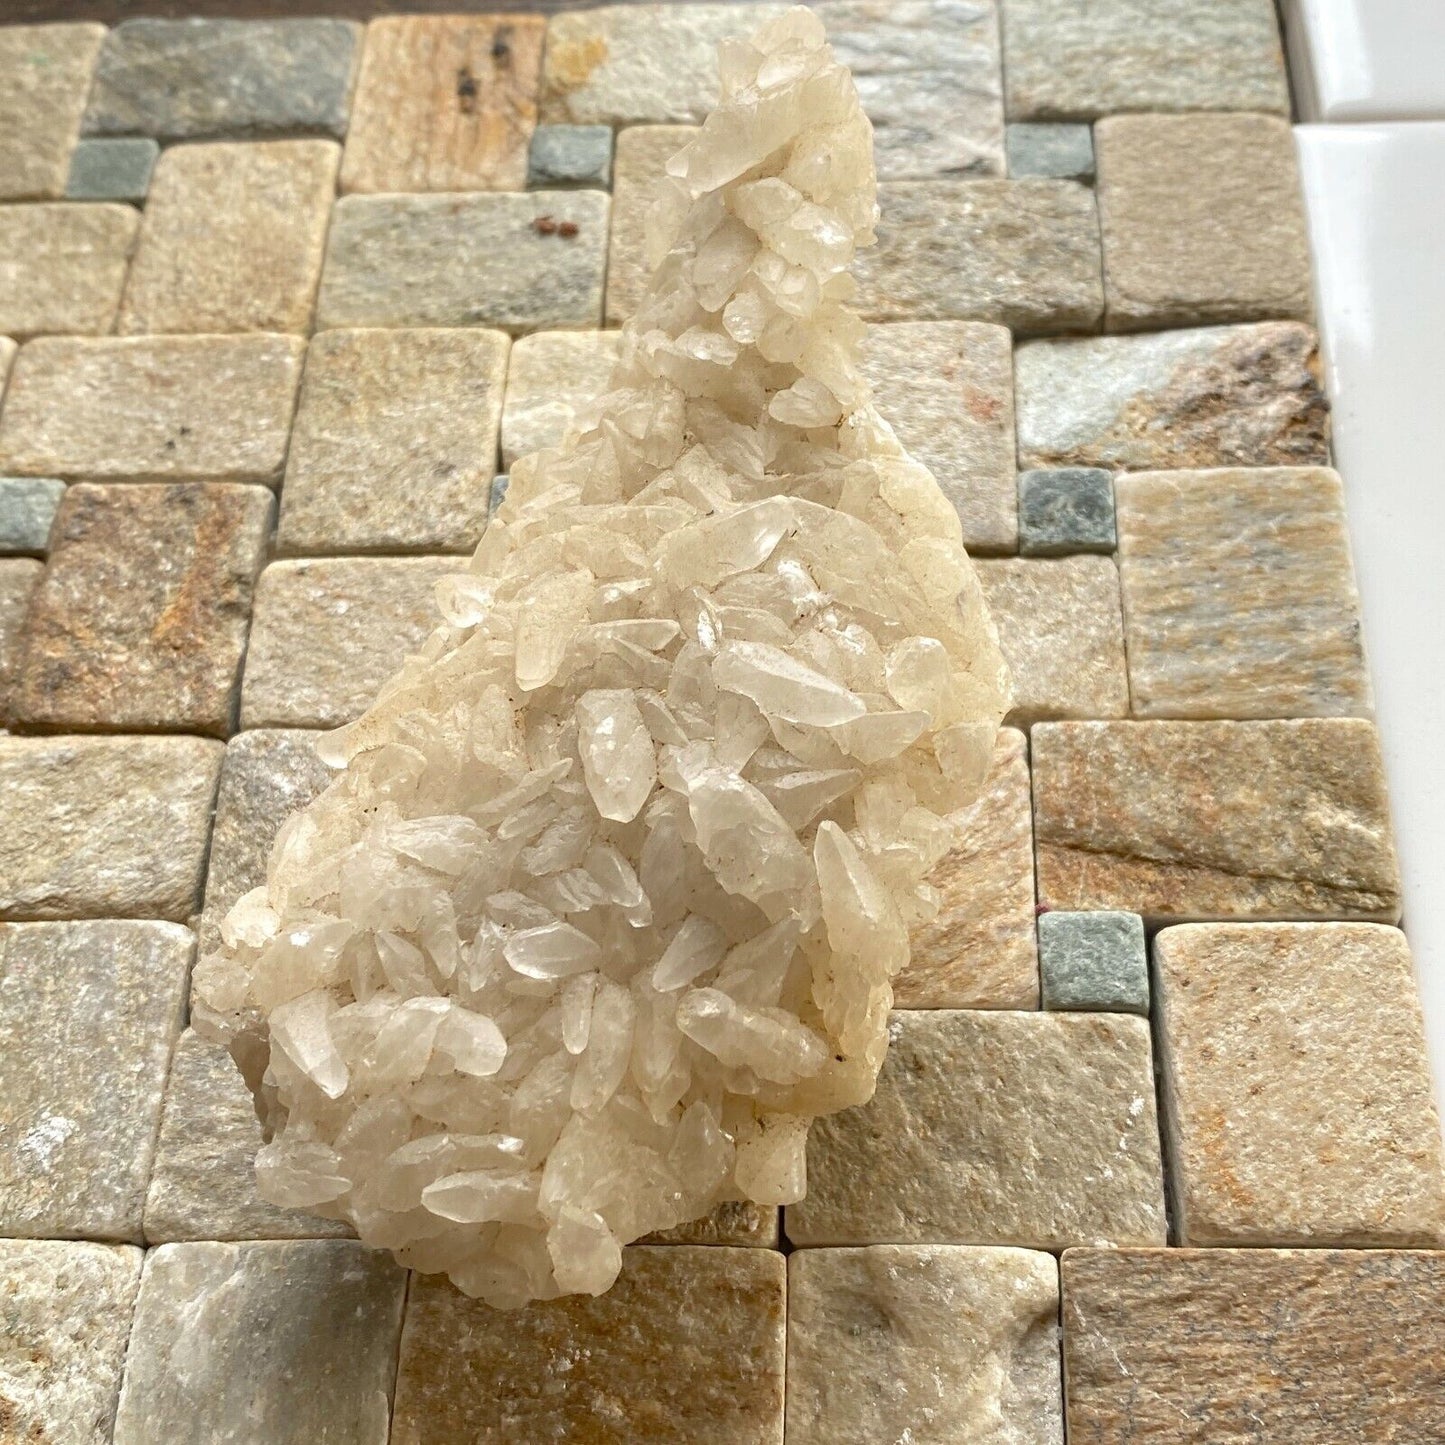 "RICE GRAIN" CALCITE FROM COLEMANS QUARRY, SOMERSET. 280g. MF6306